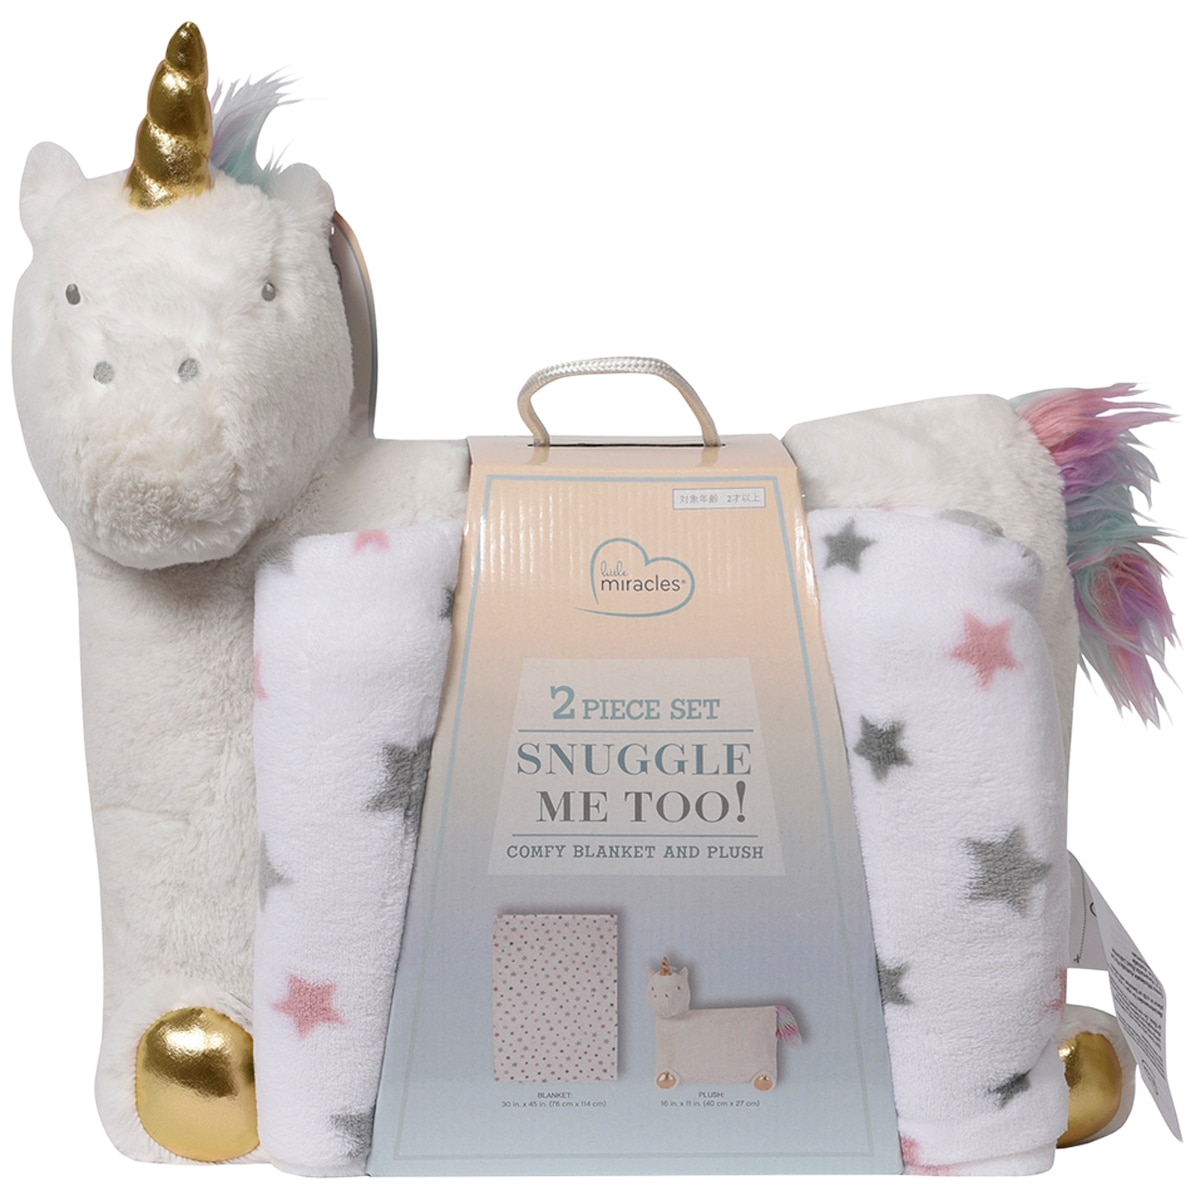 Lovey Plush Animal Unicorn New Details about   2 Pc Snuggle Me too Kid's Blanket Gift Set 